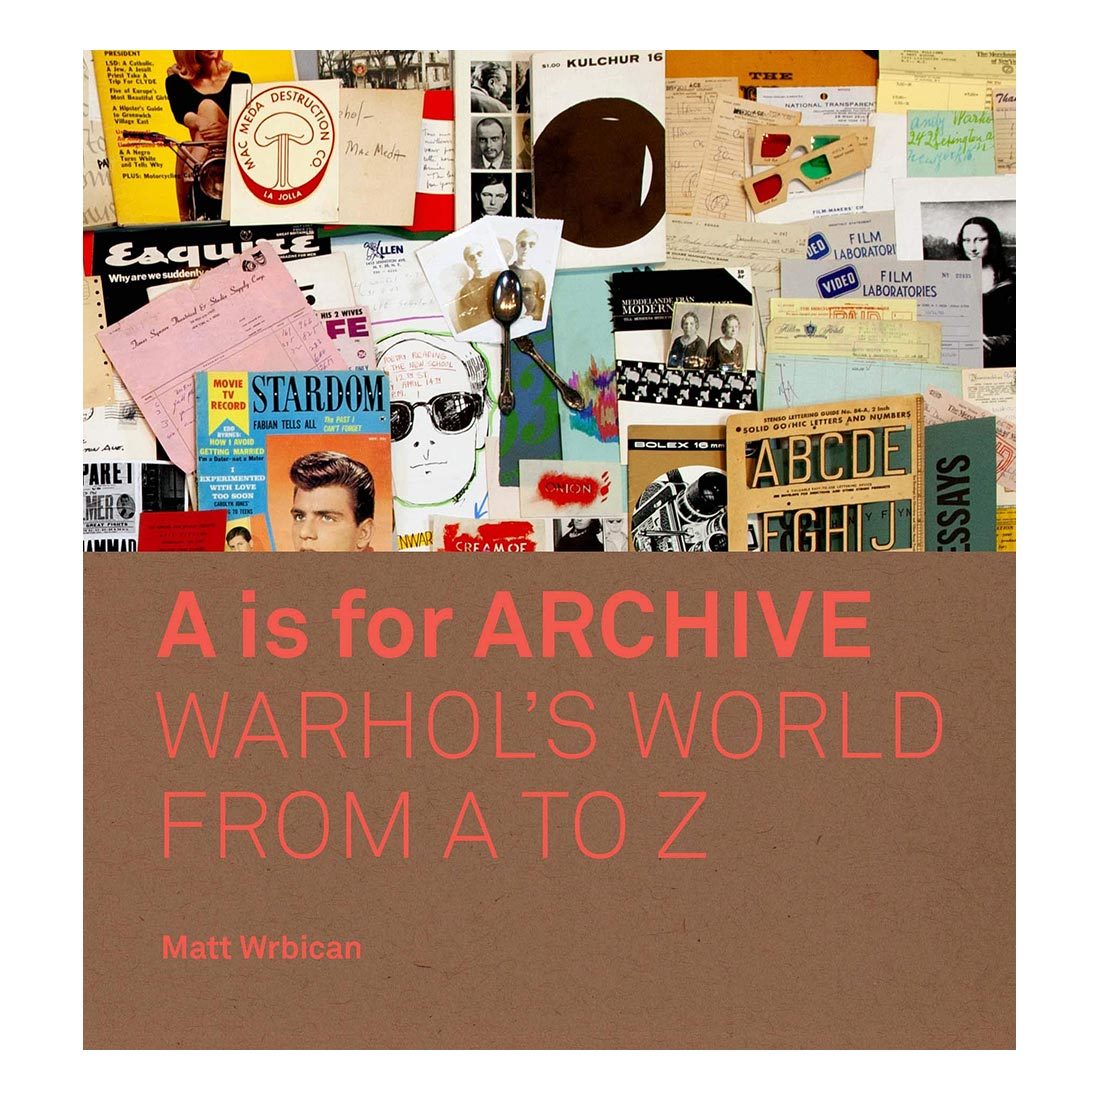 A is for Archive: Warhol’s World from A to Z